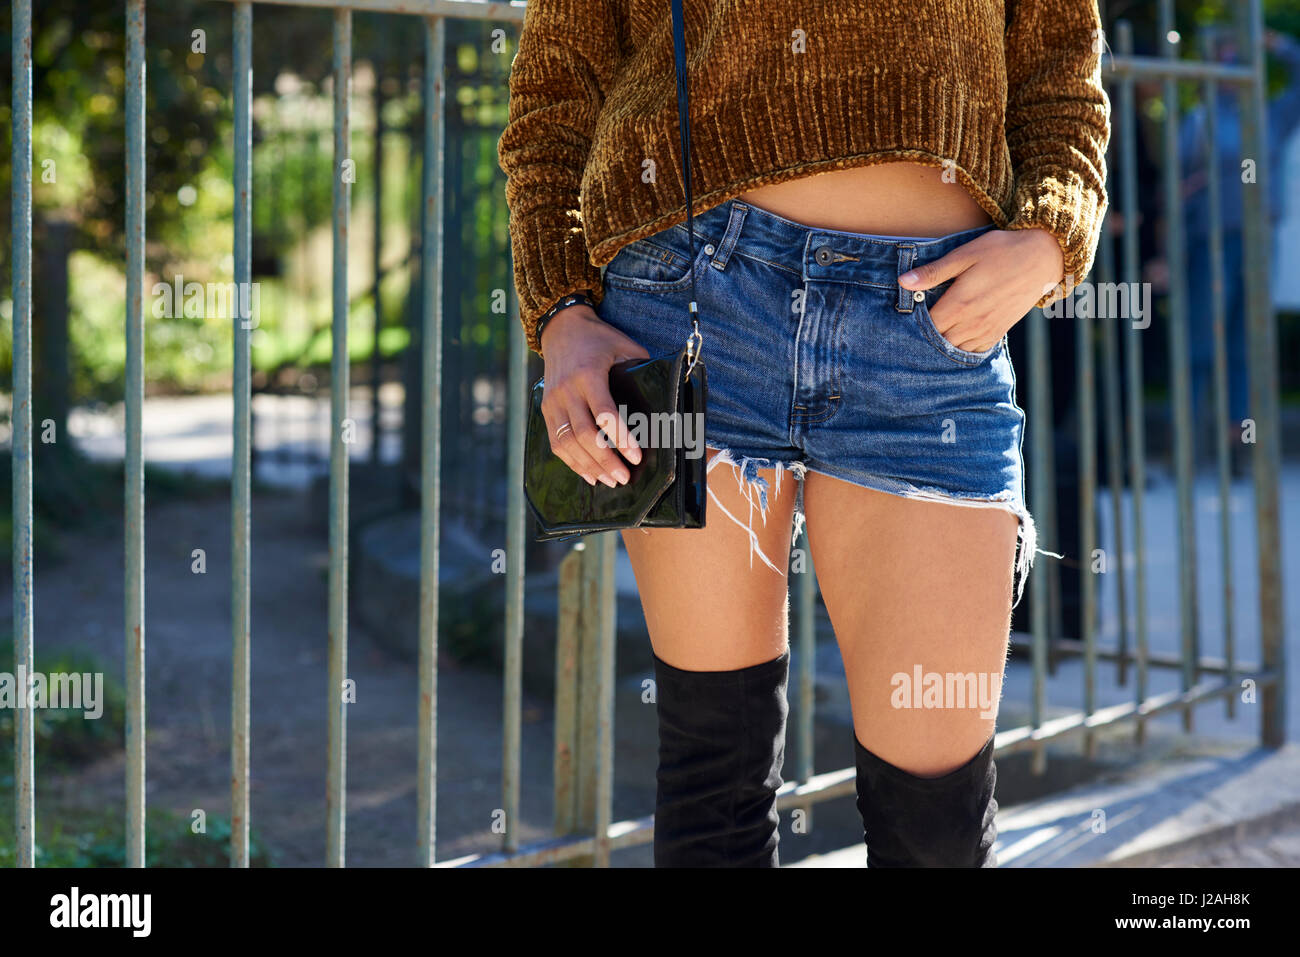 https://c8.alamy.com/comp/J2AH8K/woman-in-jean-shorts-knitted-top-and-thigh-high-boots-crop-J2AH8K.jpg